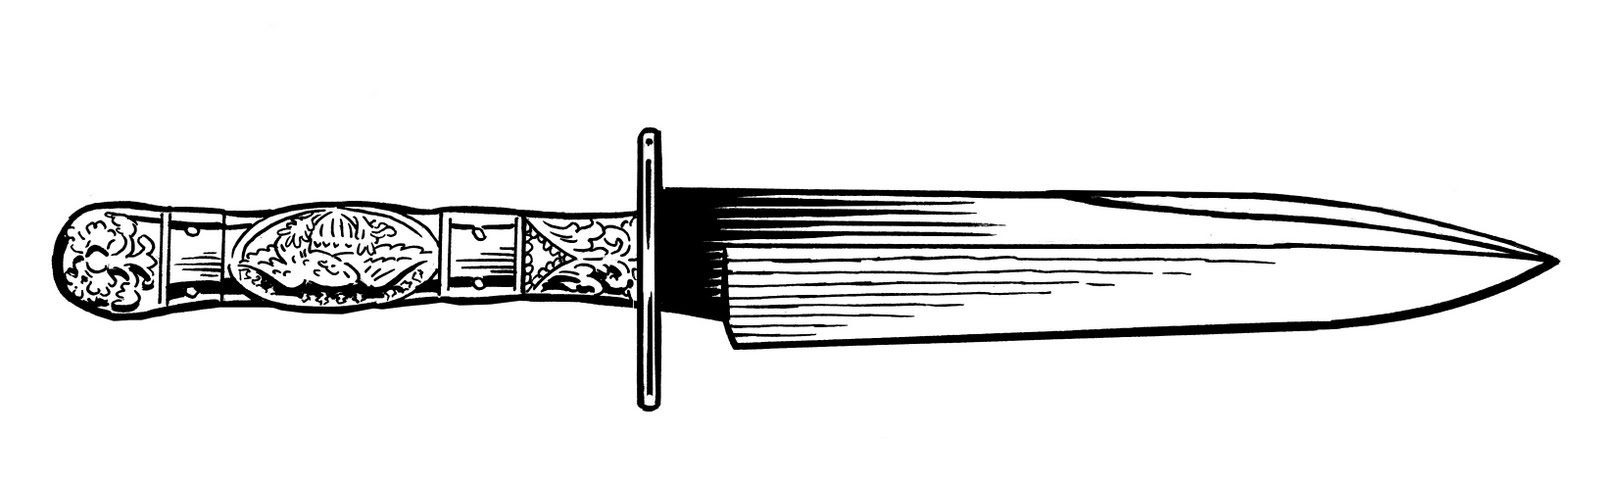 Download Knife Coloring pages 🖌 to print and color